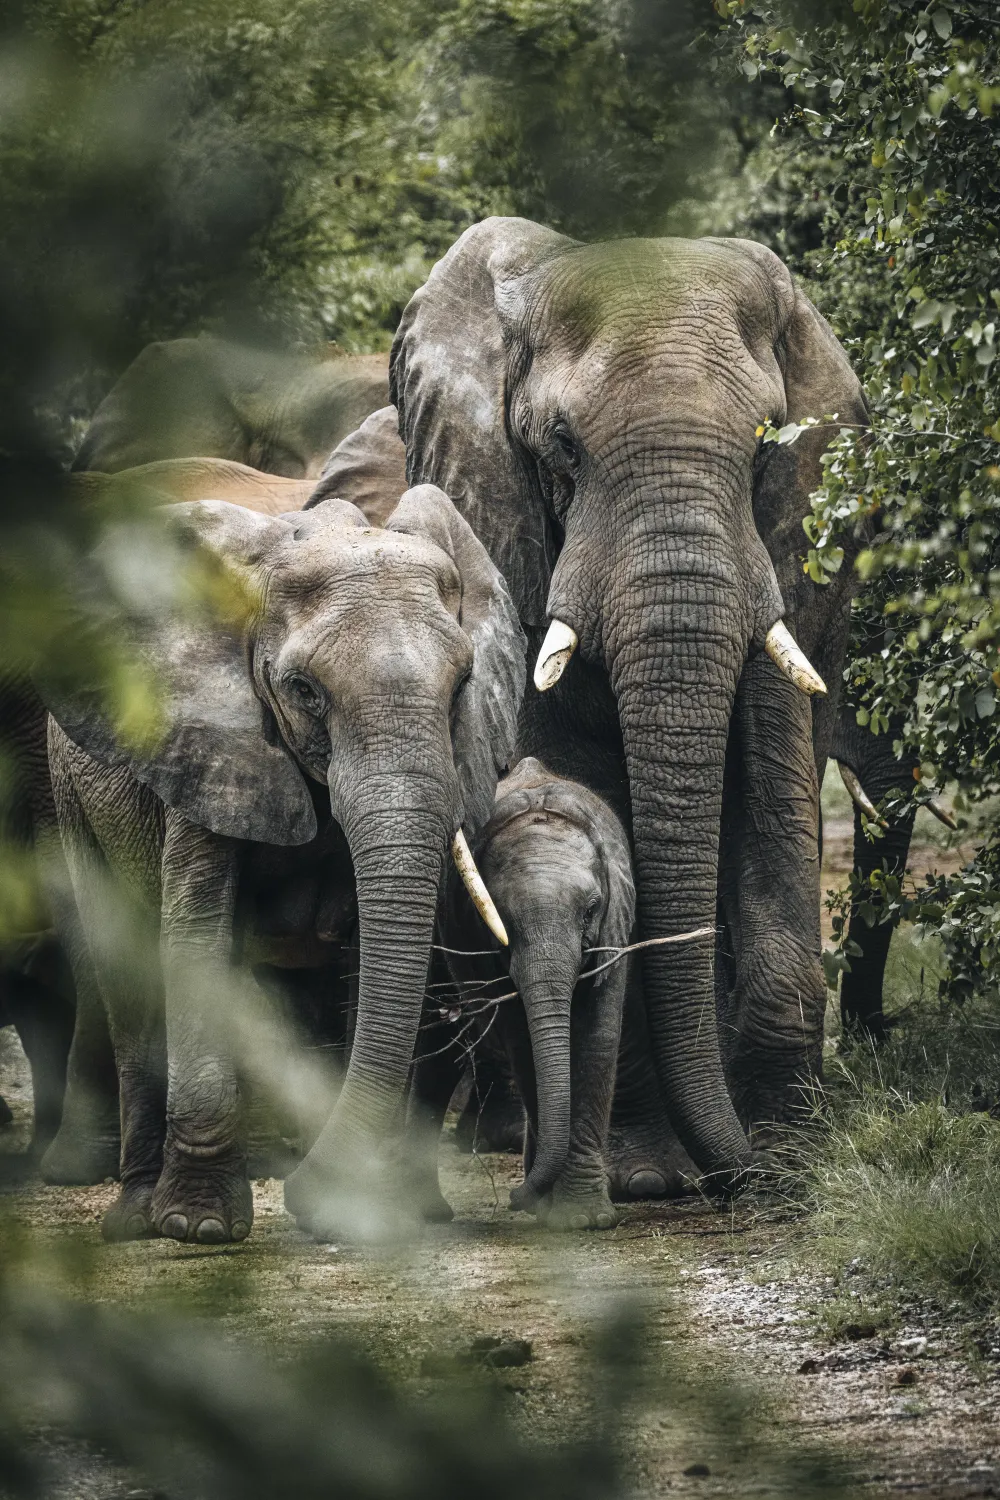 A baby elephant not yet aware of the dangers lurking in its world playfully carries a branch around.  While the baby might not be aware the family is. And the matriarch stands close by and keeps a watchful eye out.